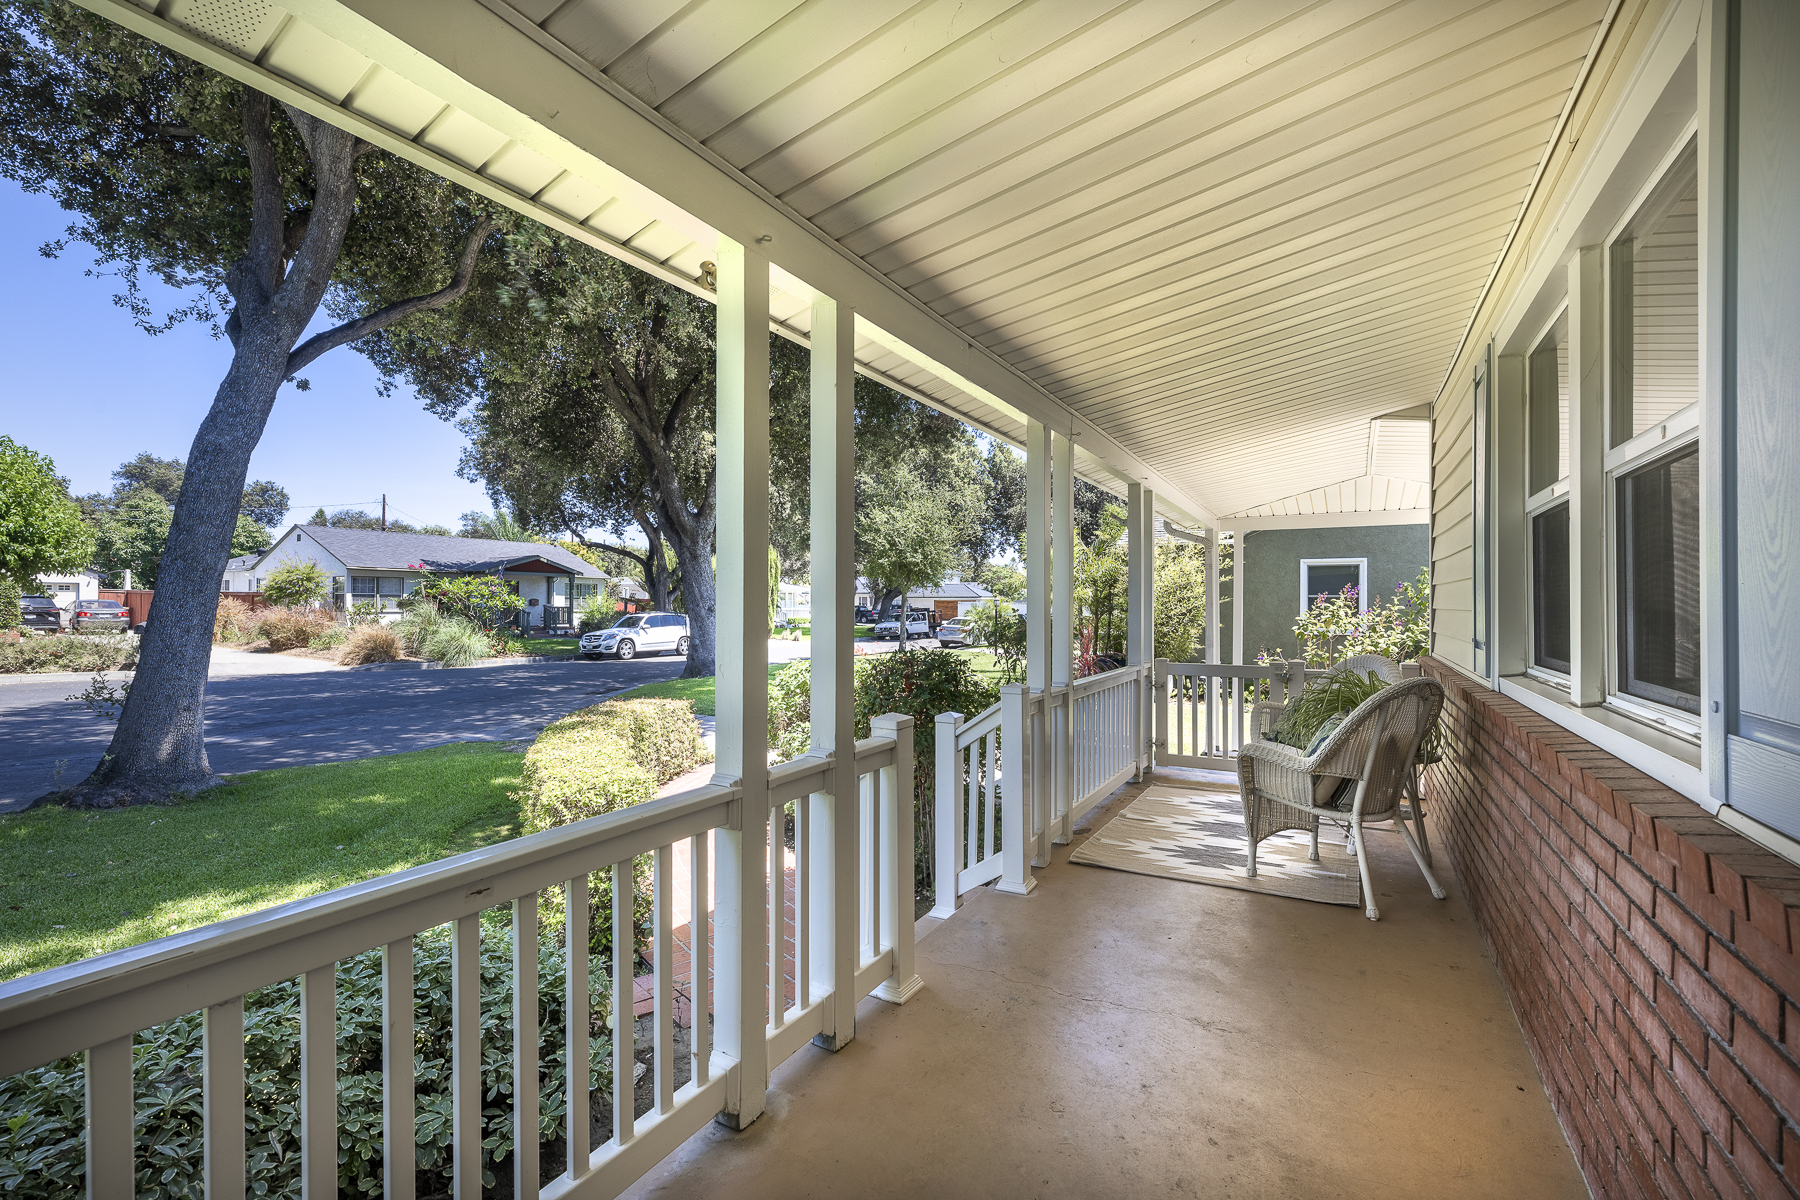 411 Truman Ave, Fullerton, CA 92832: Exterior view front porch street view.